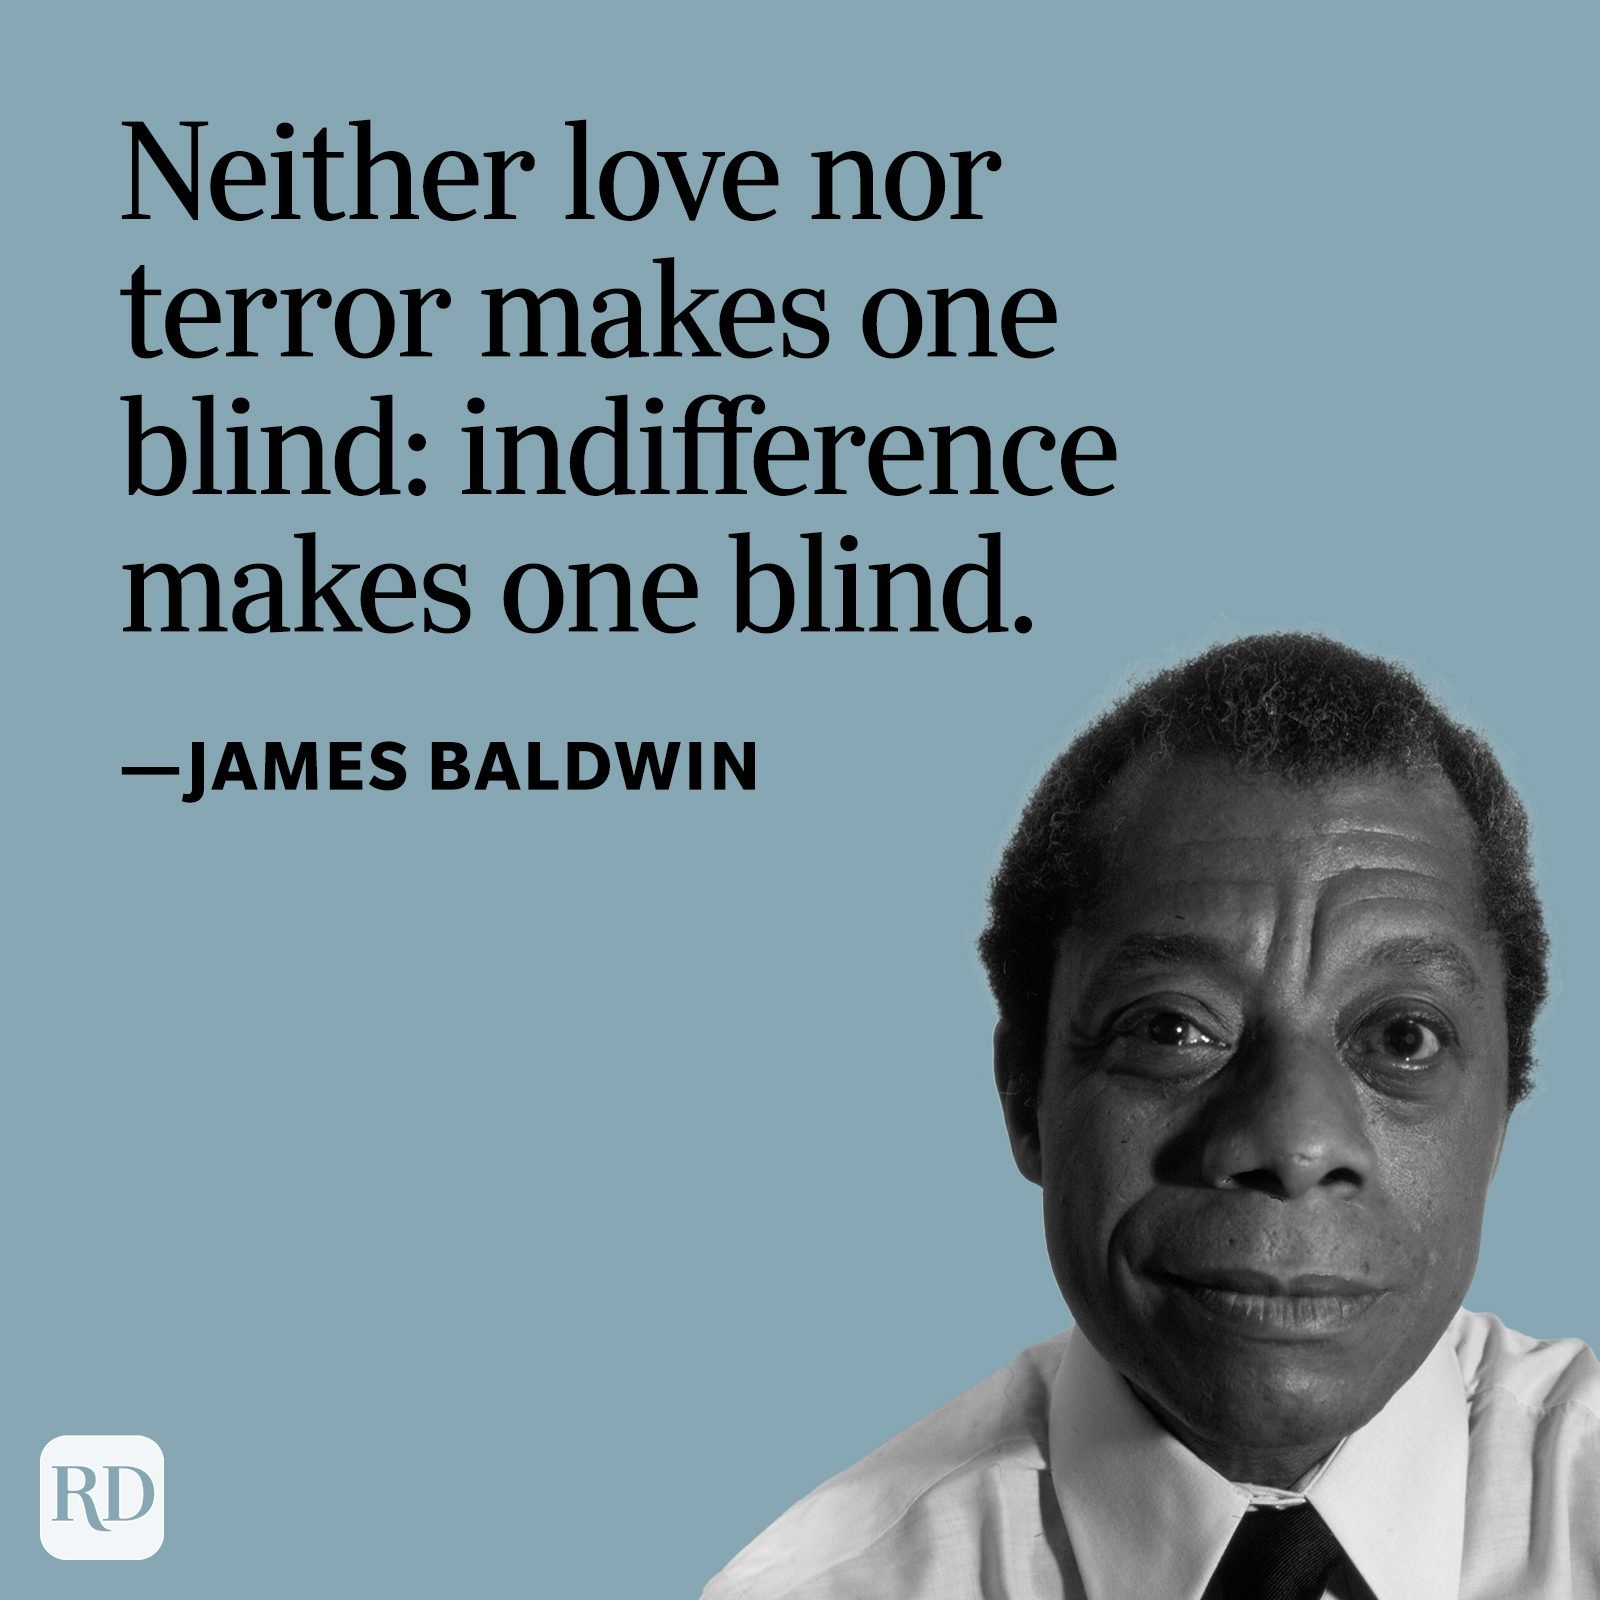 40 James Baldwin Quotes on Love, Freedom, and Equality